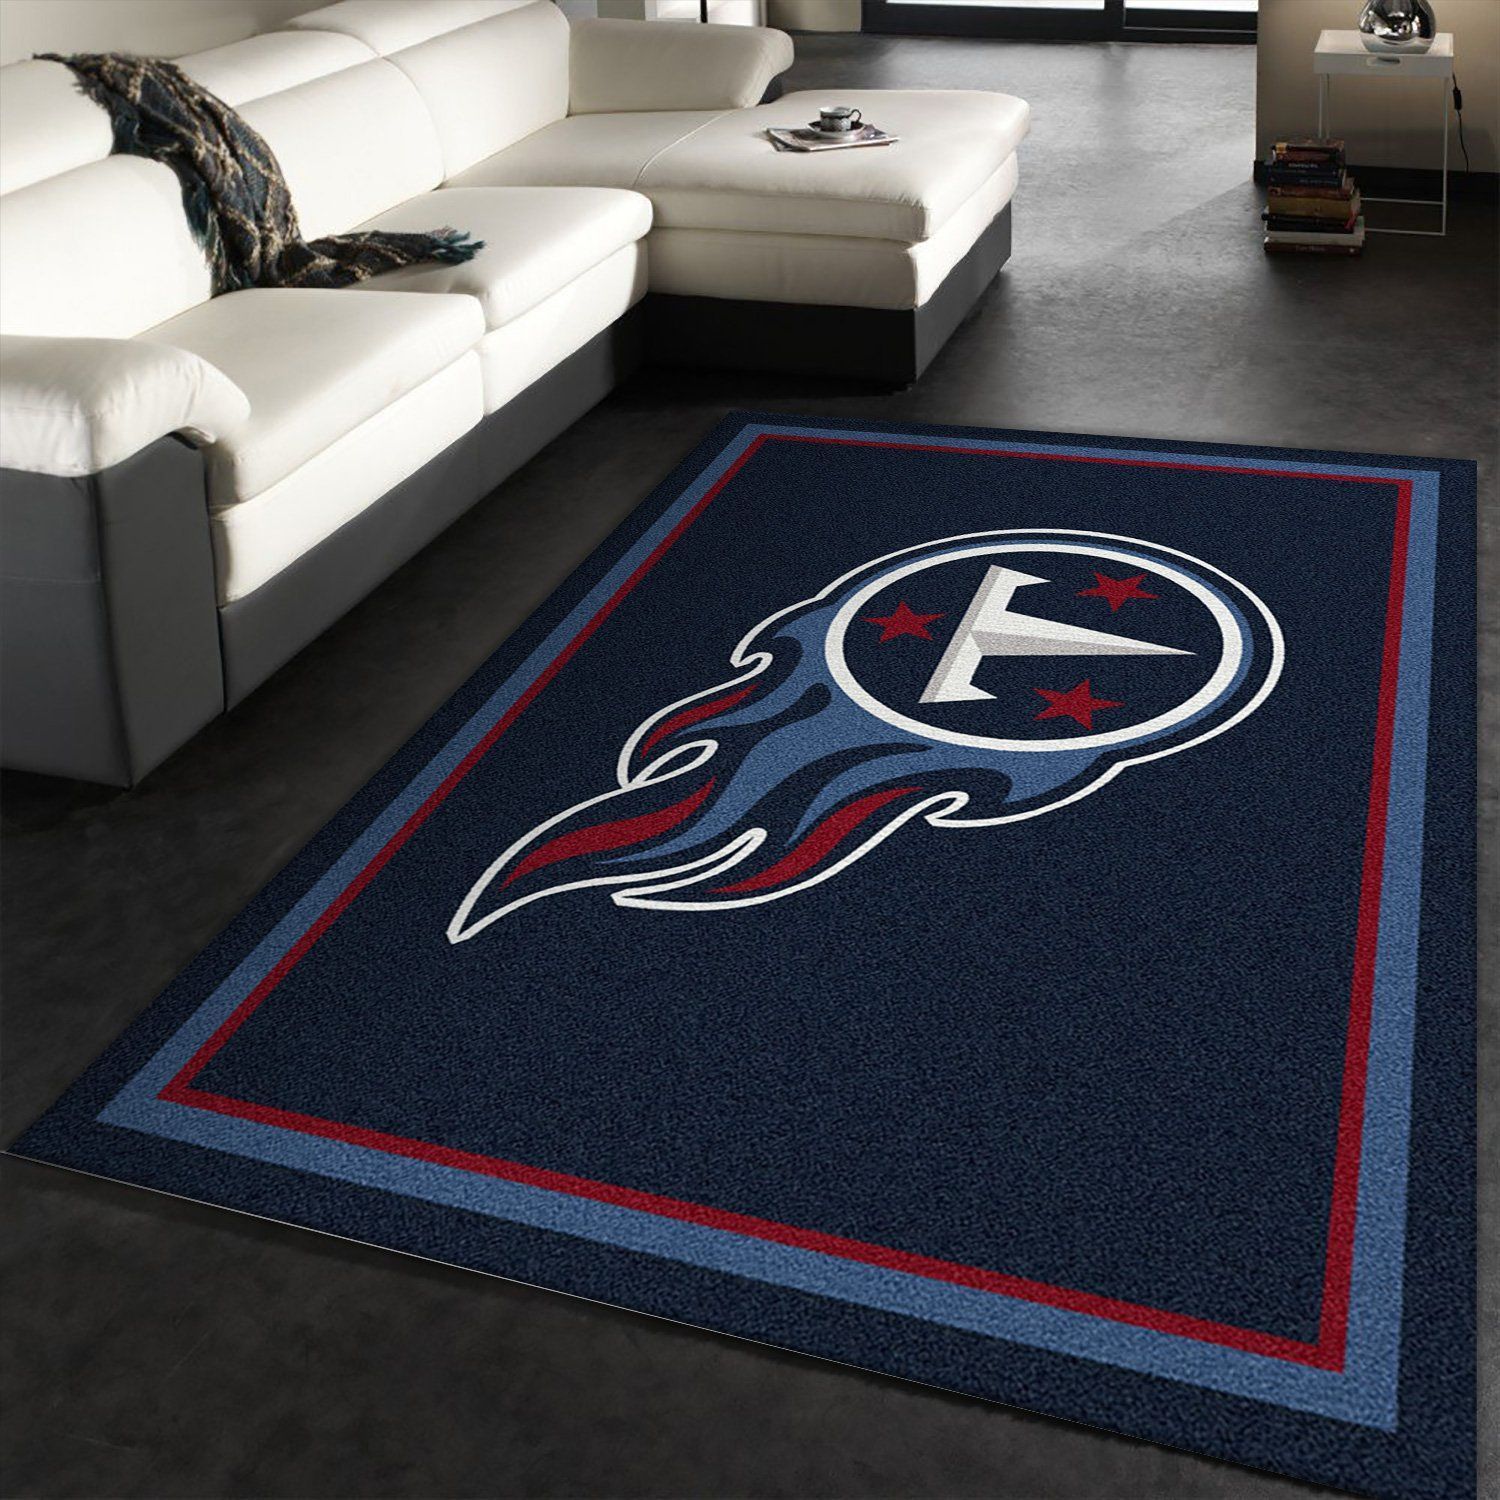 Nfl Spirit Tennessee Titans Area Rug For Christmas, Bedroom Rug, Home US Decor - Indoor Outdoor Rugs